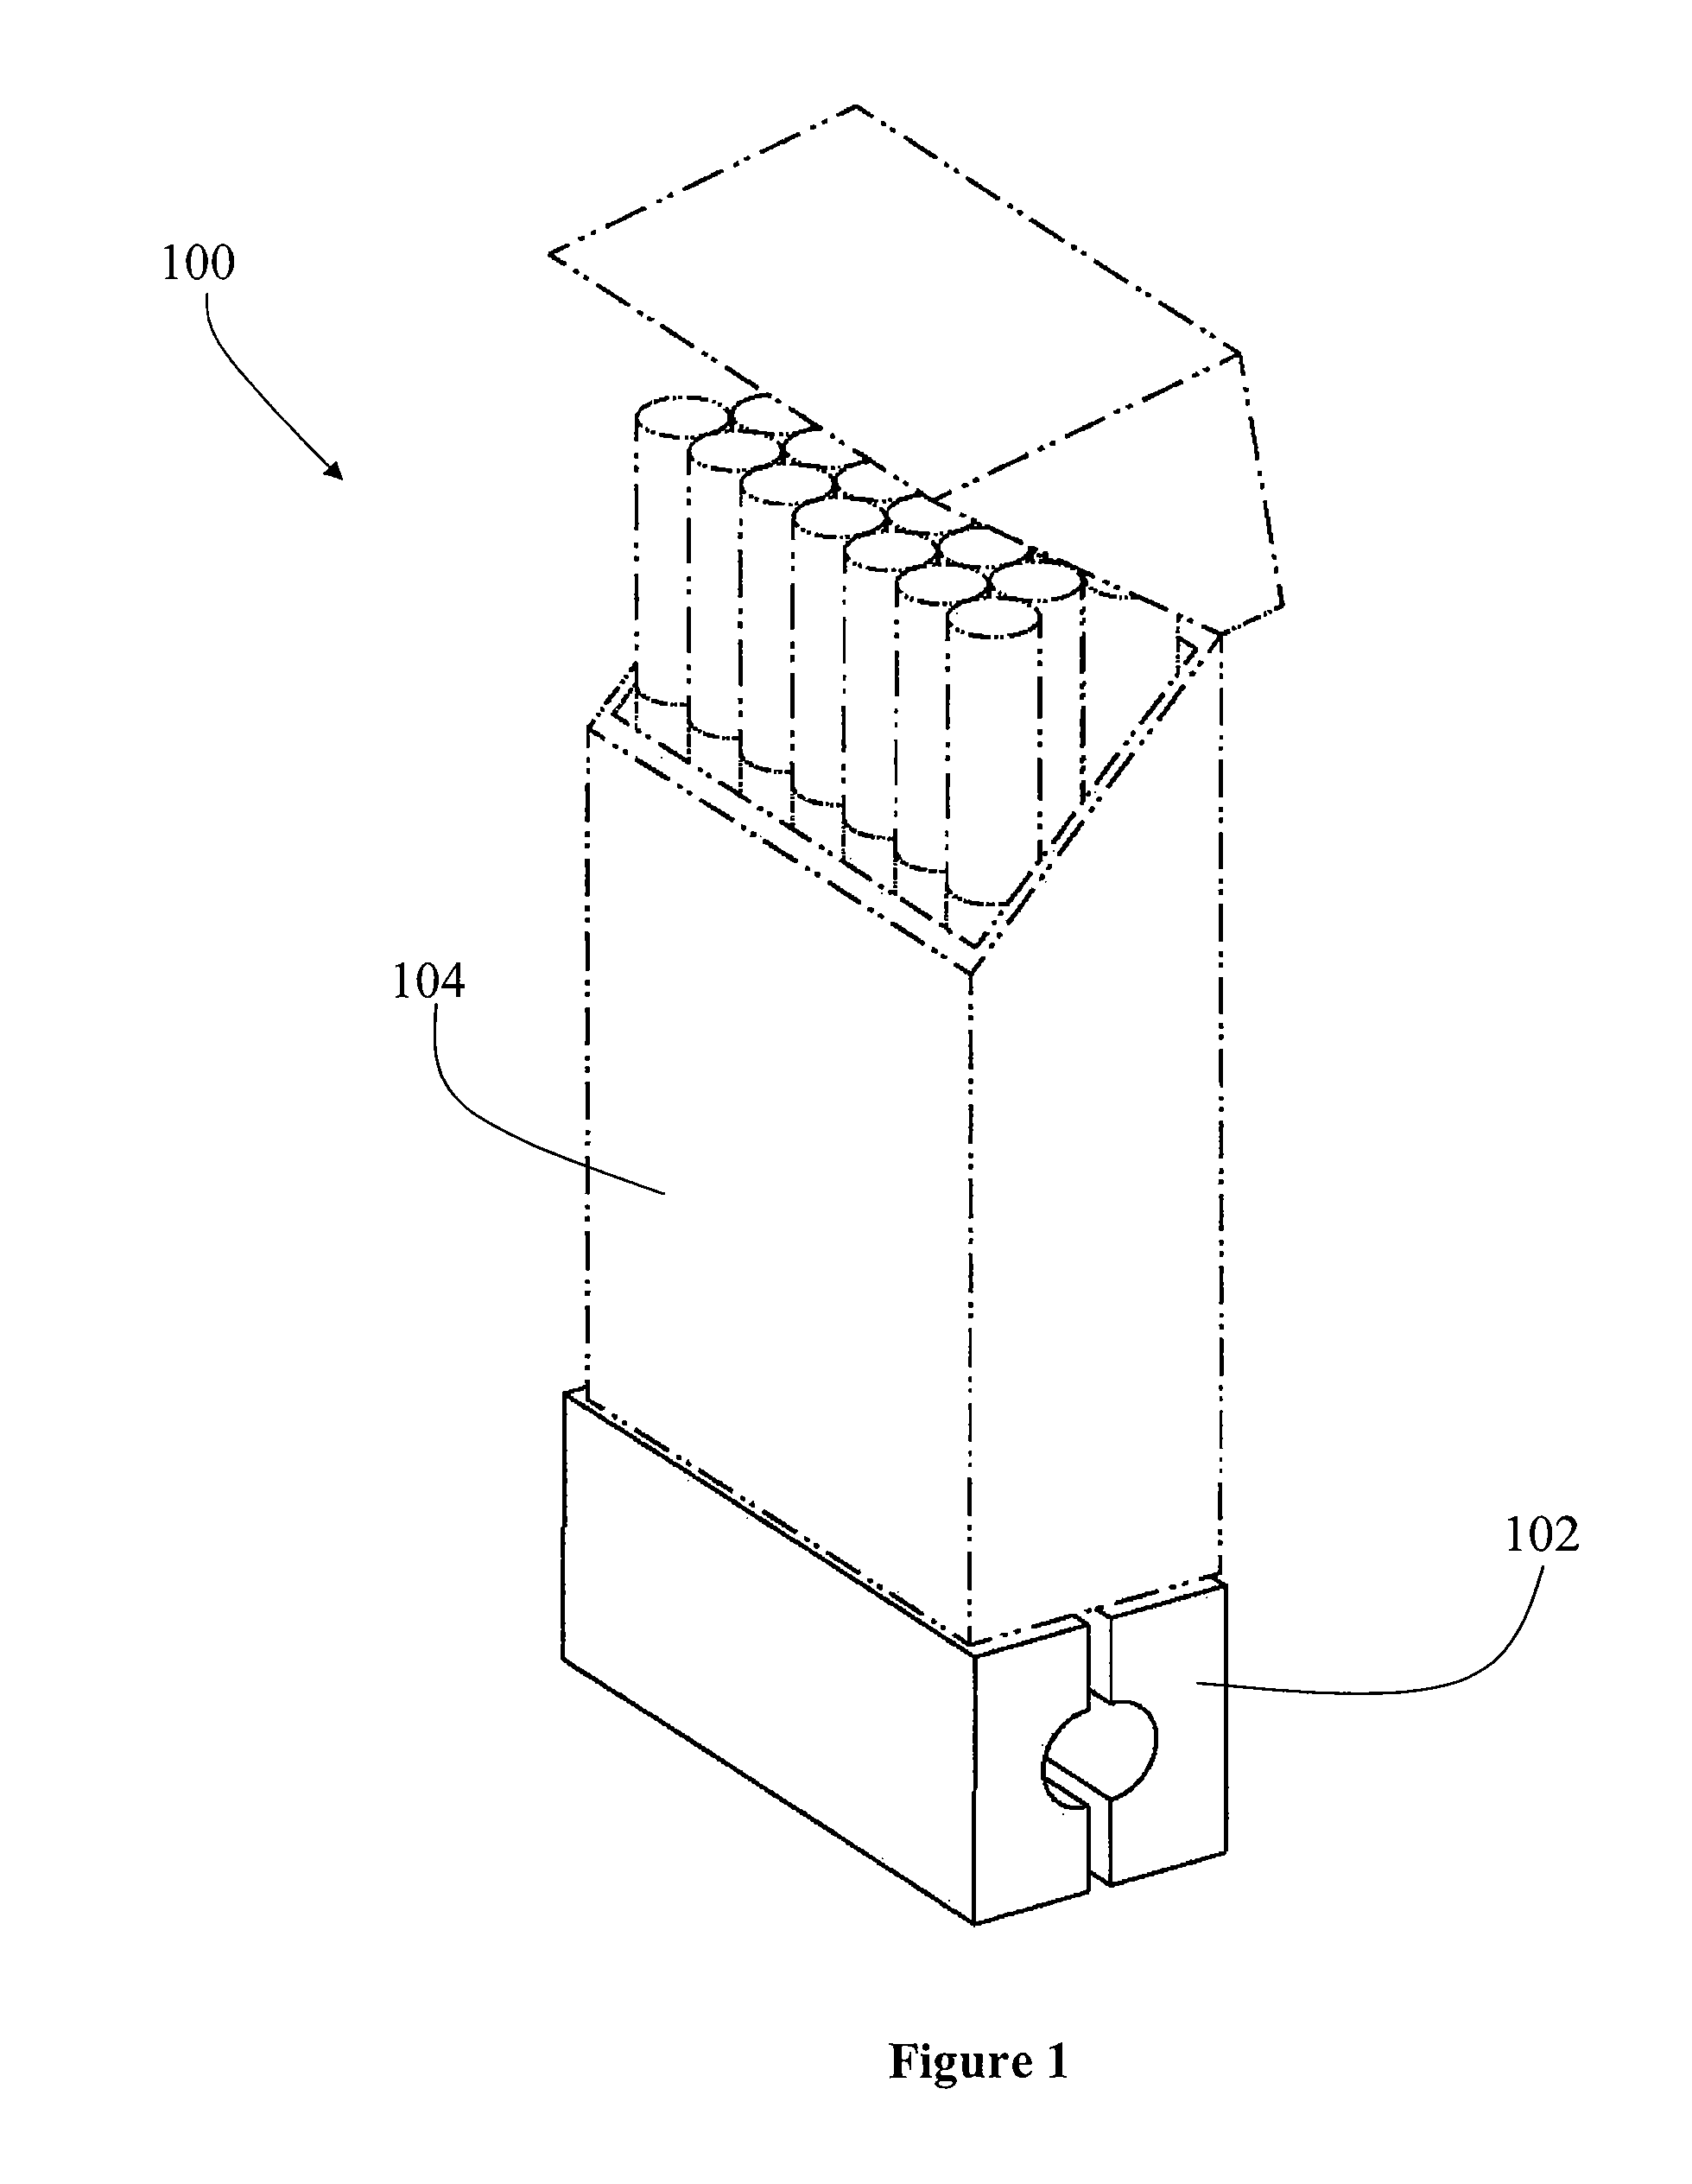 Lighting apparatus for tobacco-based products